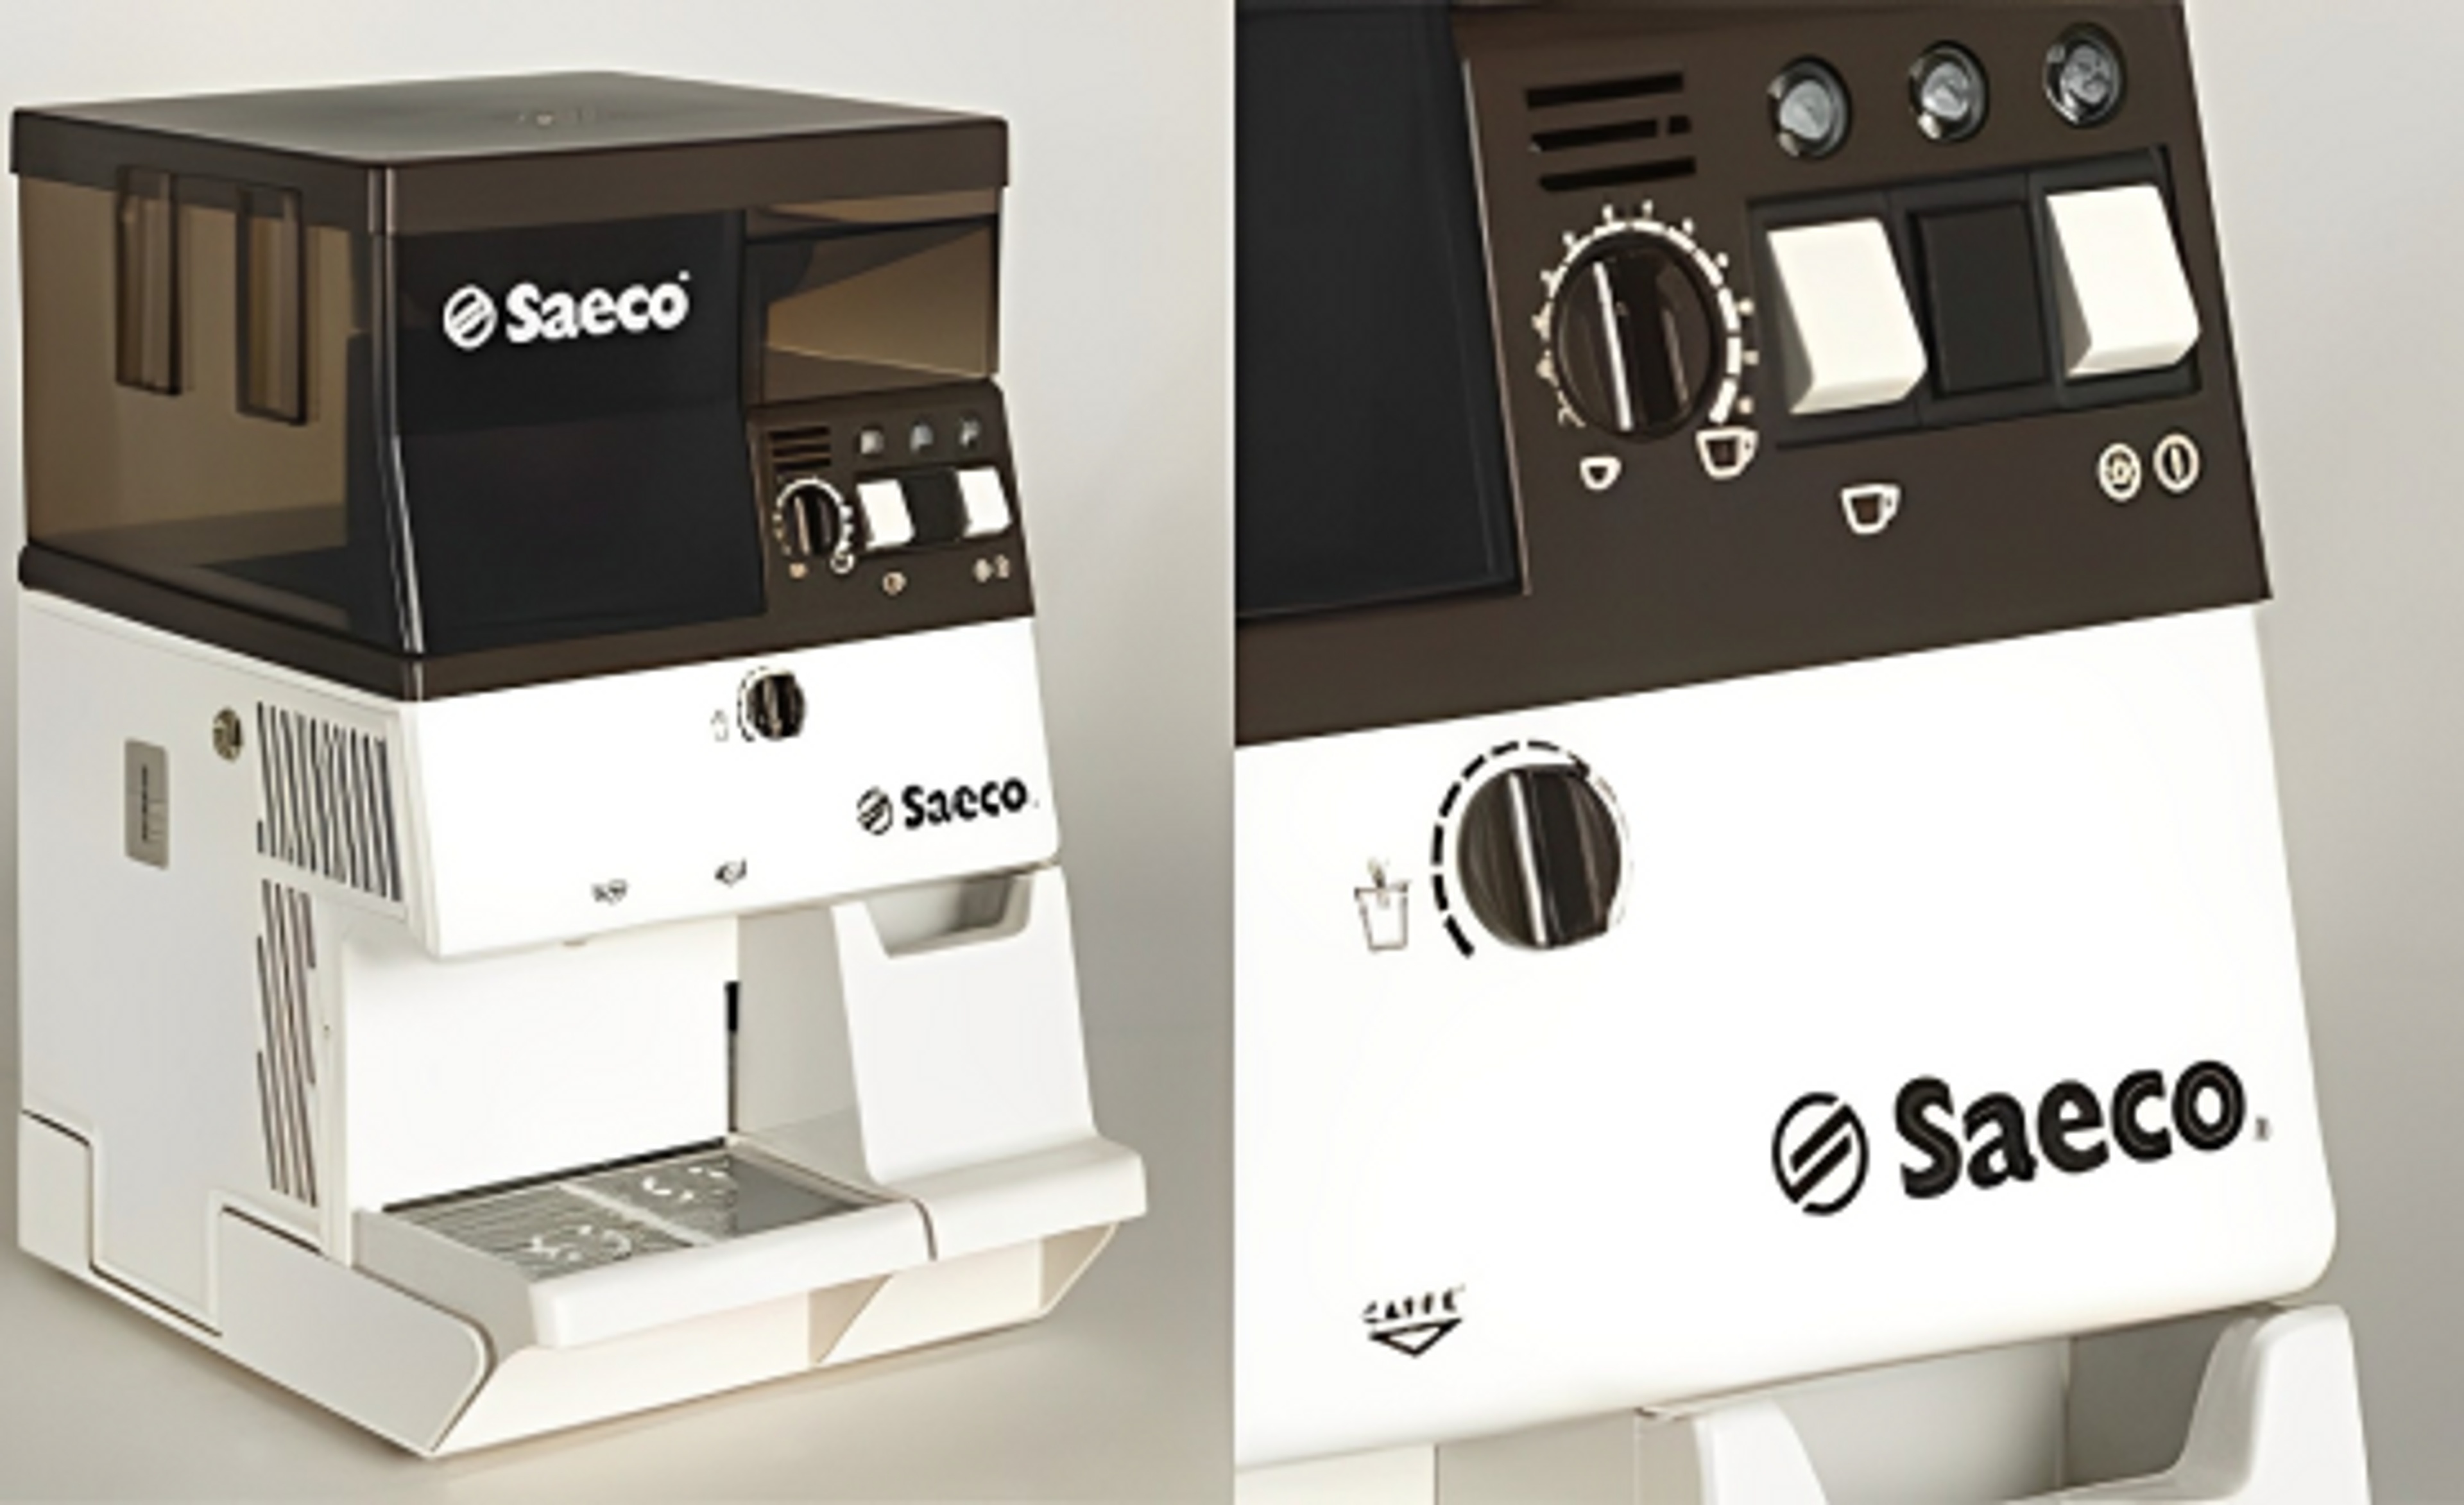 The first-ever fully automatic  espresso machine for home use